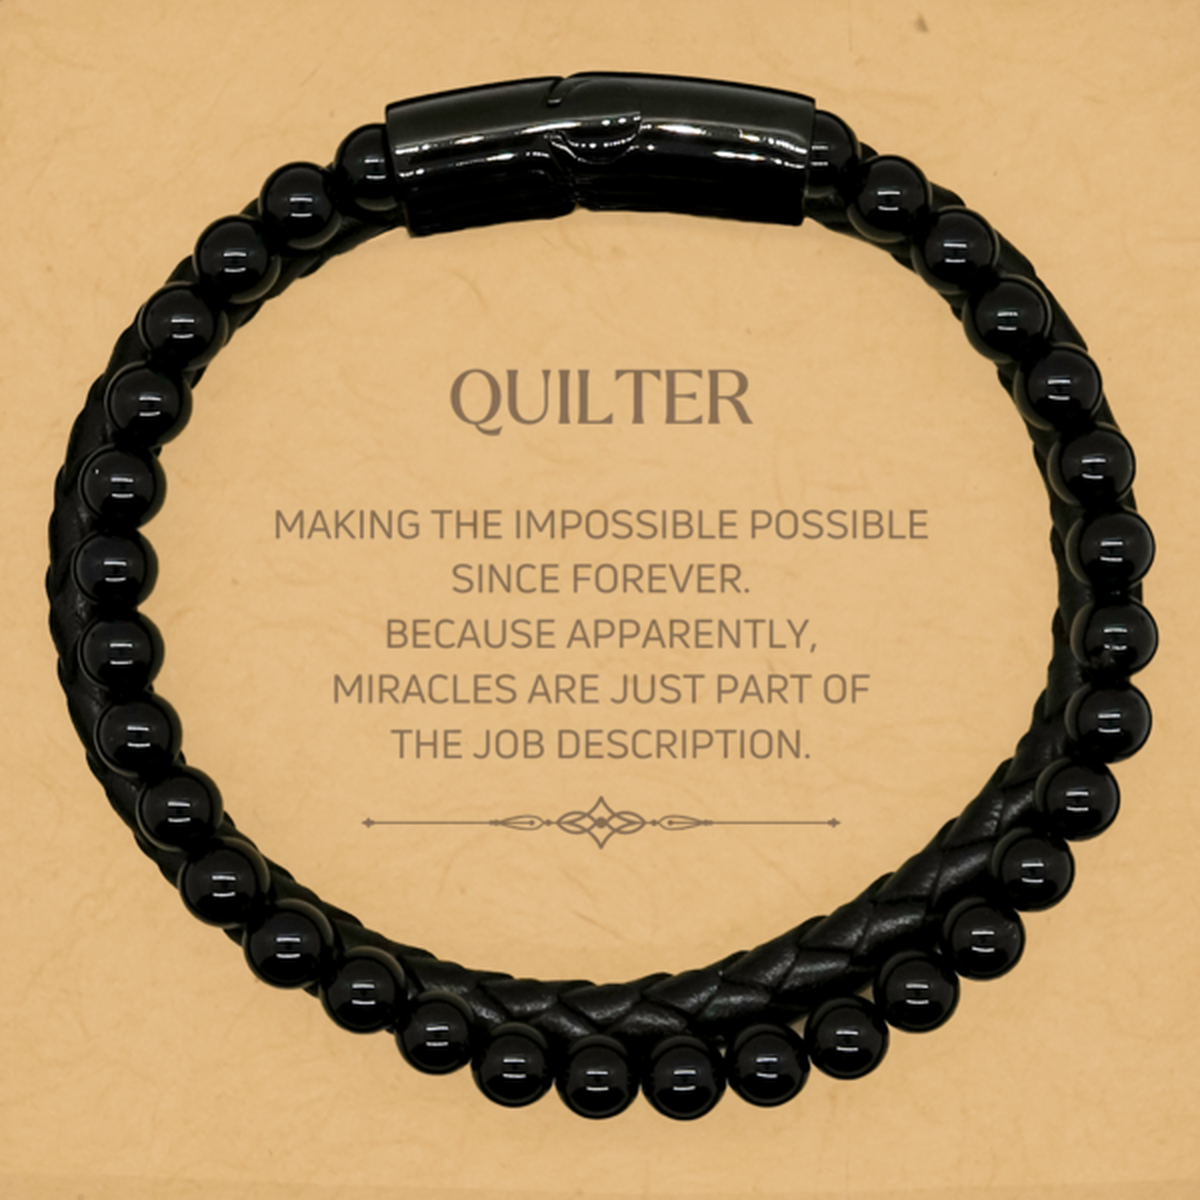 Funny Quilter Gifts, Miracles are just part of the job description, Inspirational Birthday Stone Leather Bracelets For Quilter, Men, Women, Coworkers, Friends, Boss